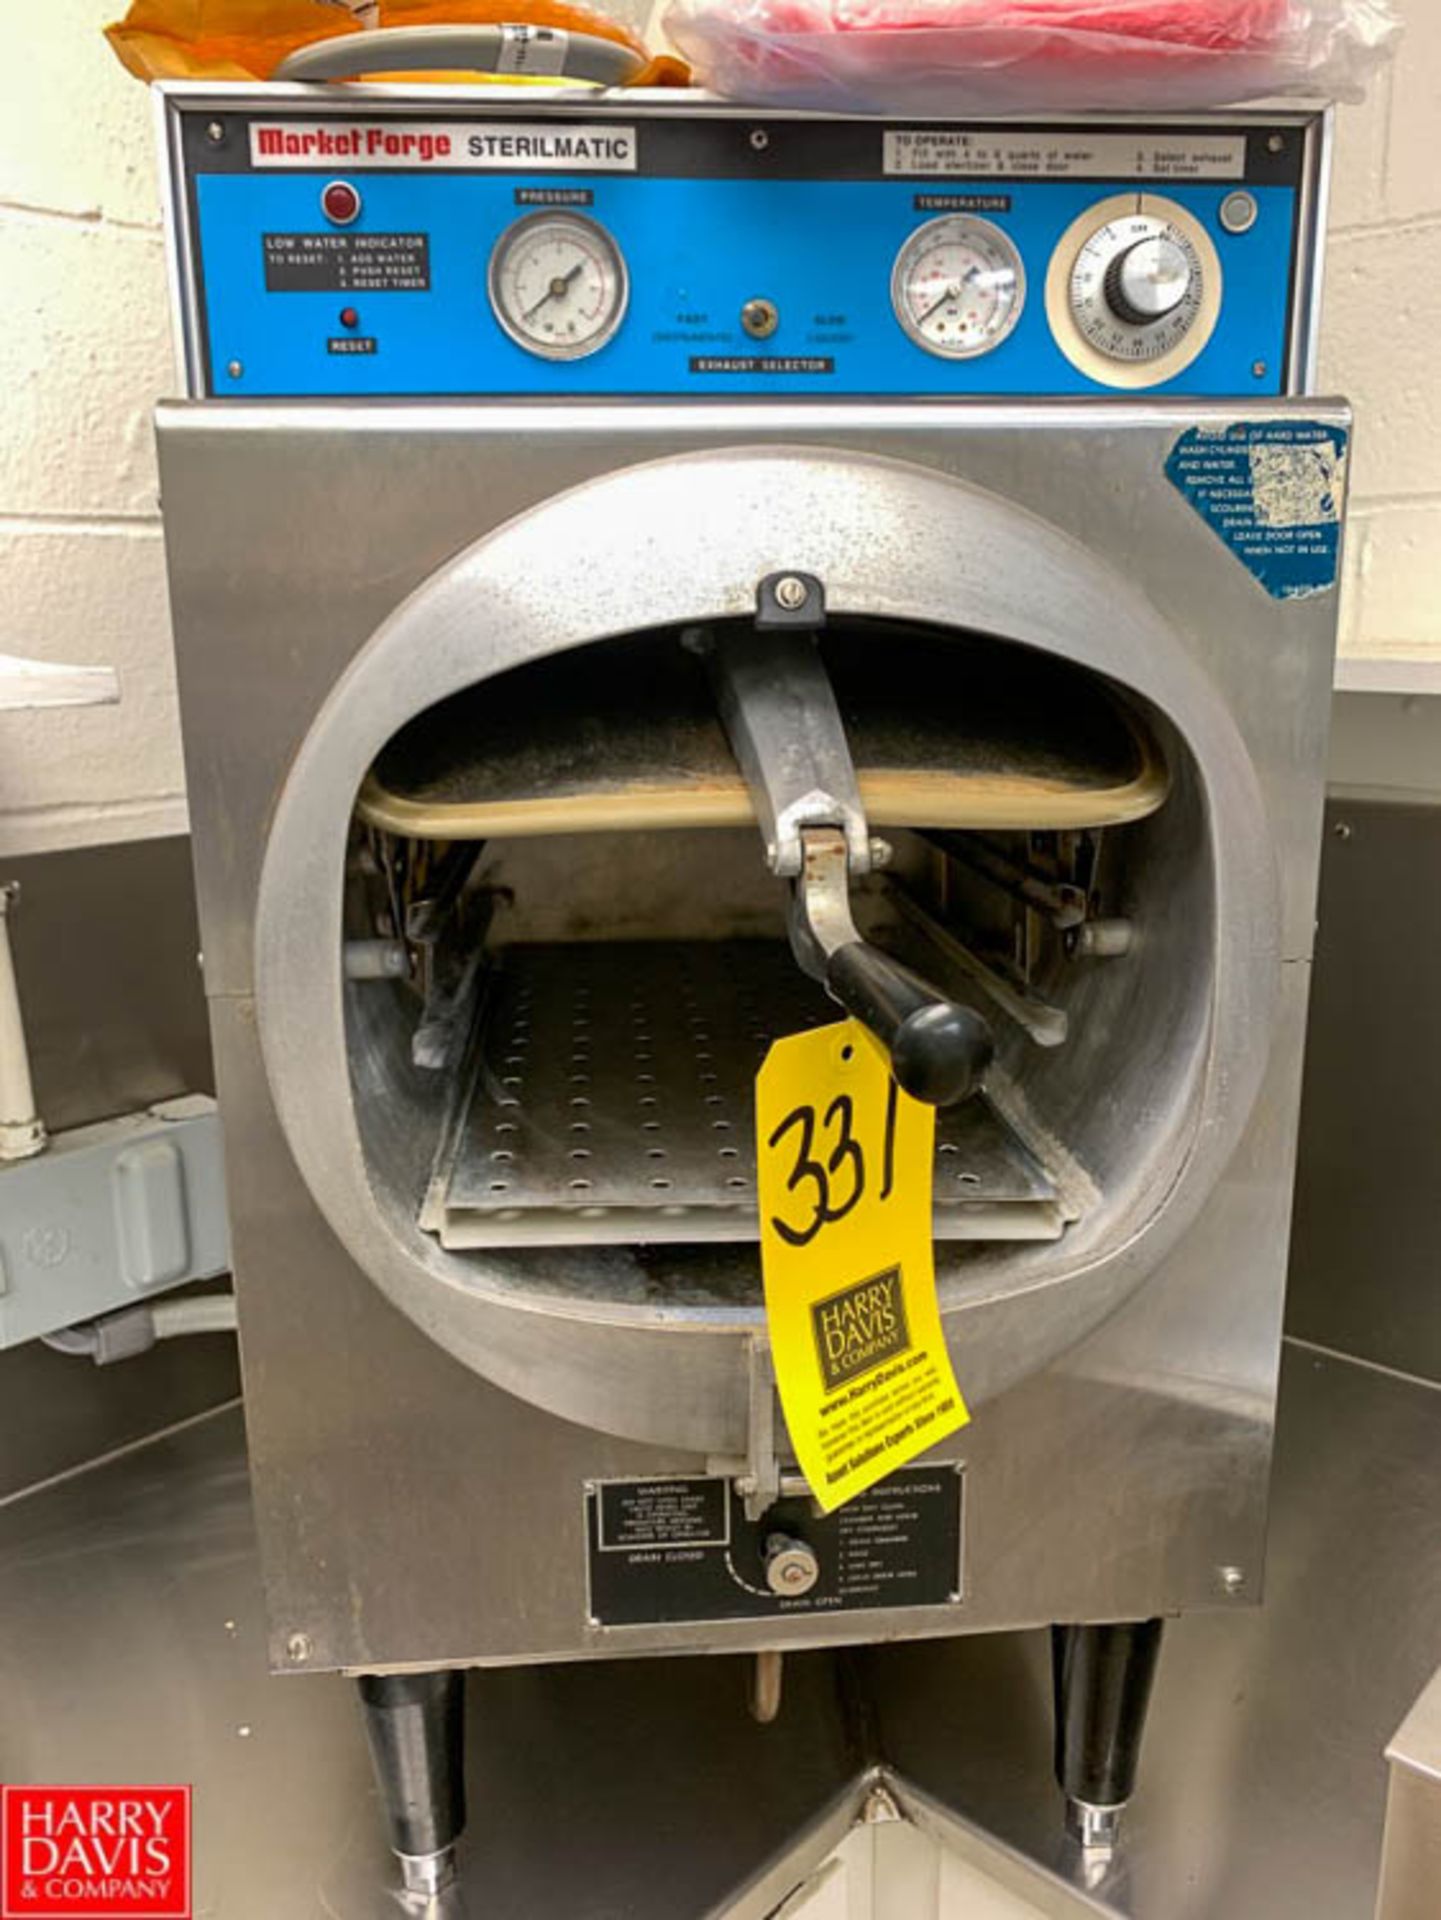 Market Forge Sterilmatic Autoclave Rigging Fee: $150